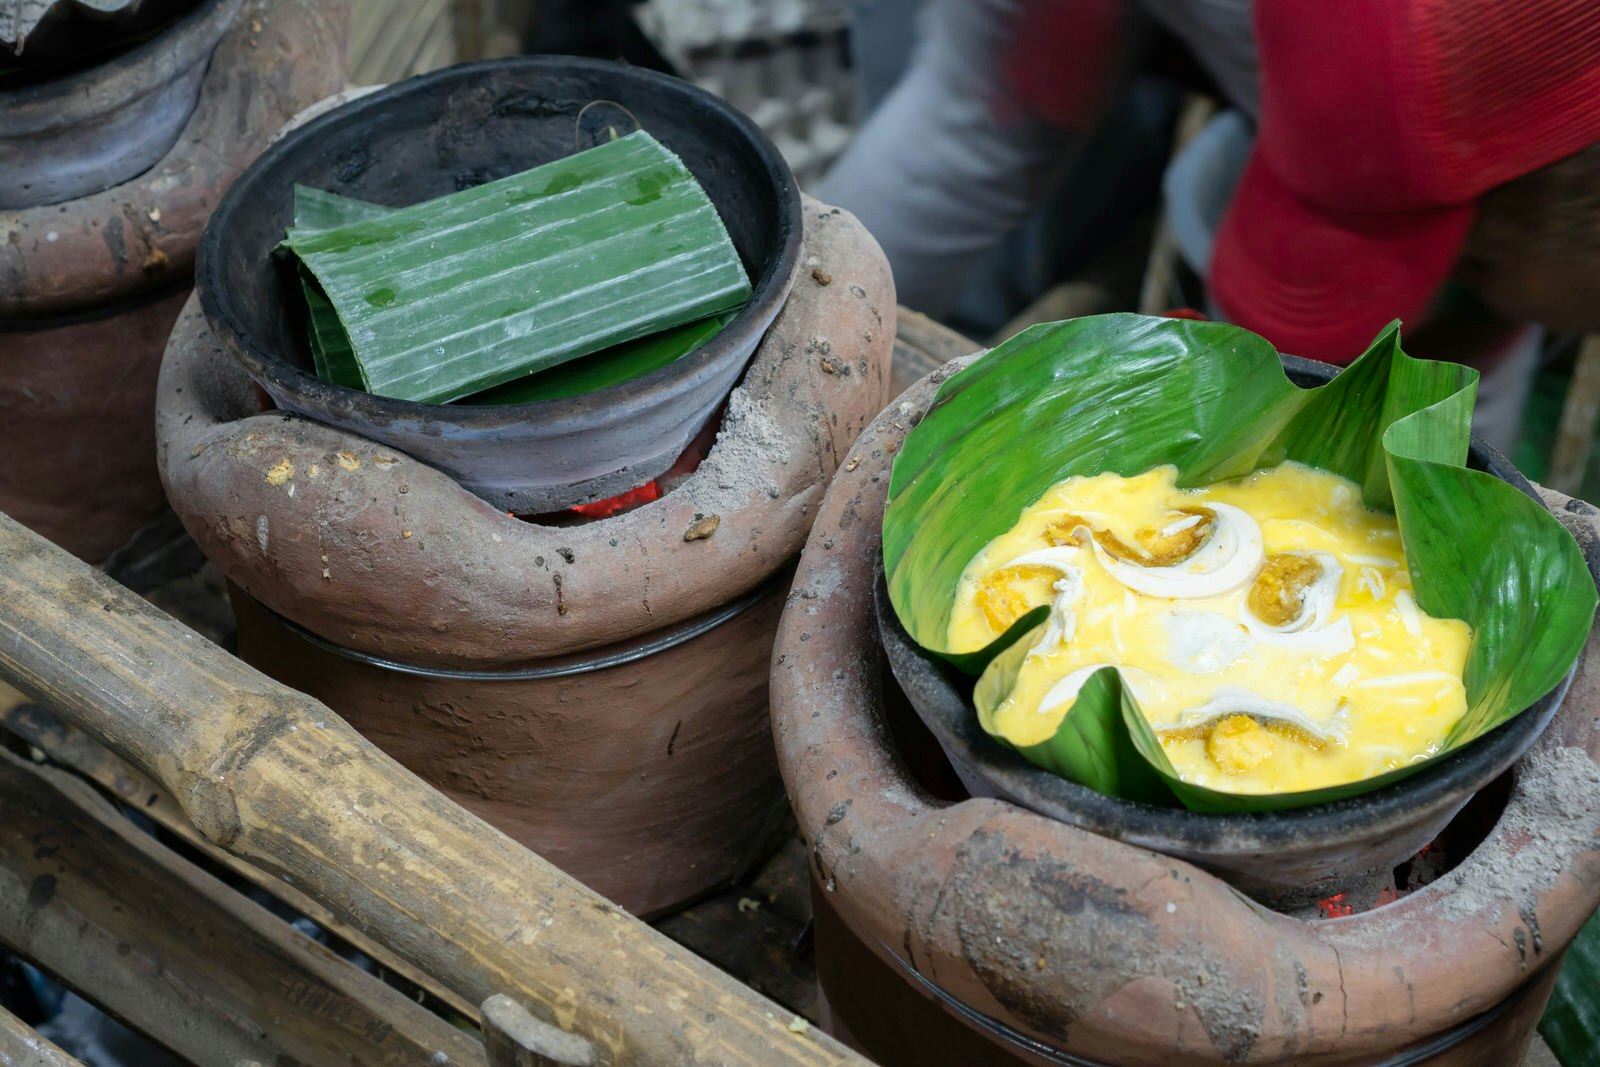 Bibingka being prepared in terracotta pots over hot coals, wrapped in banana leaves